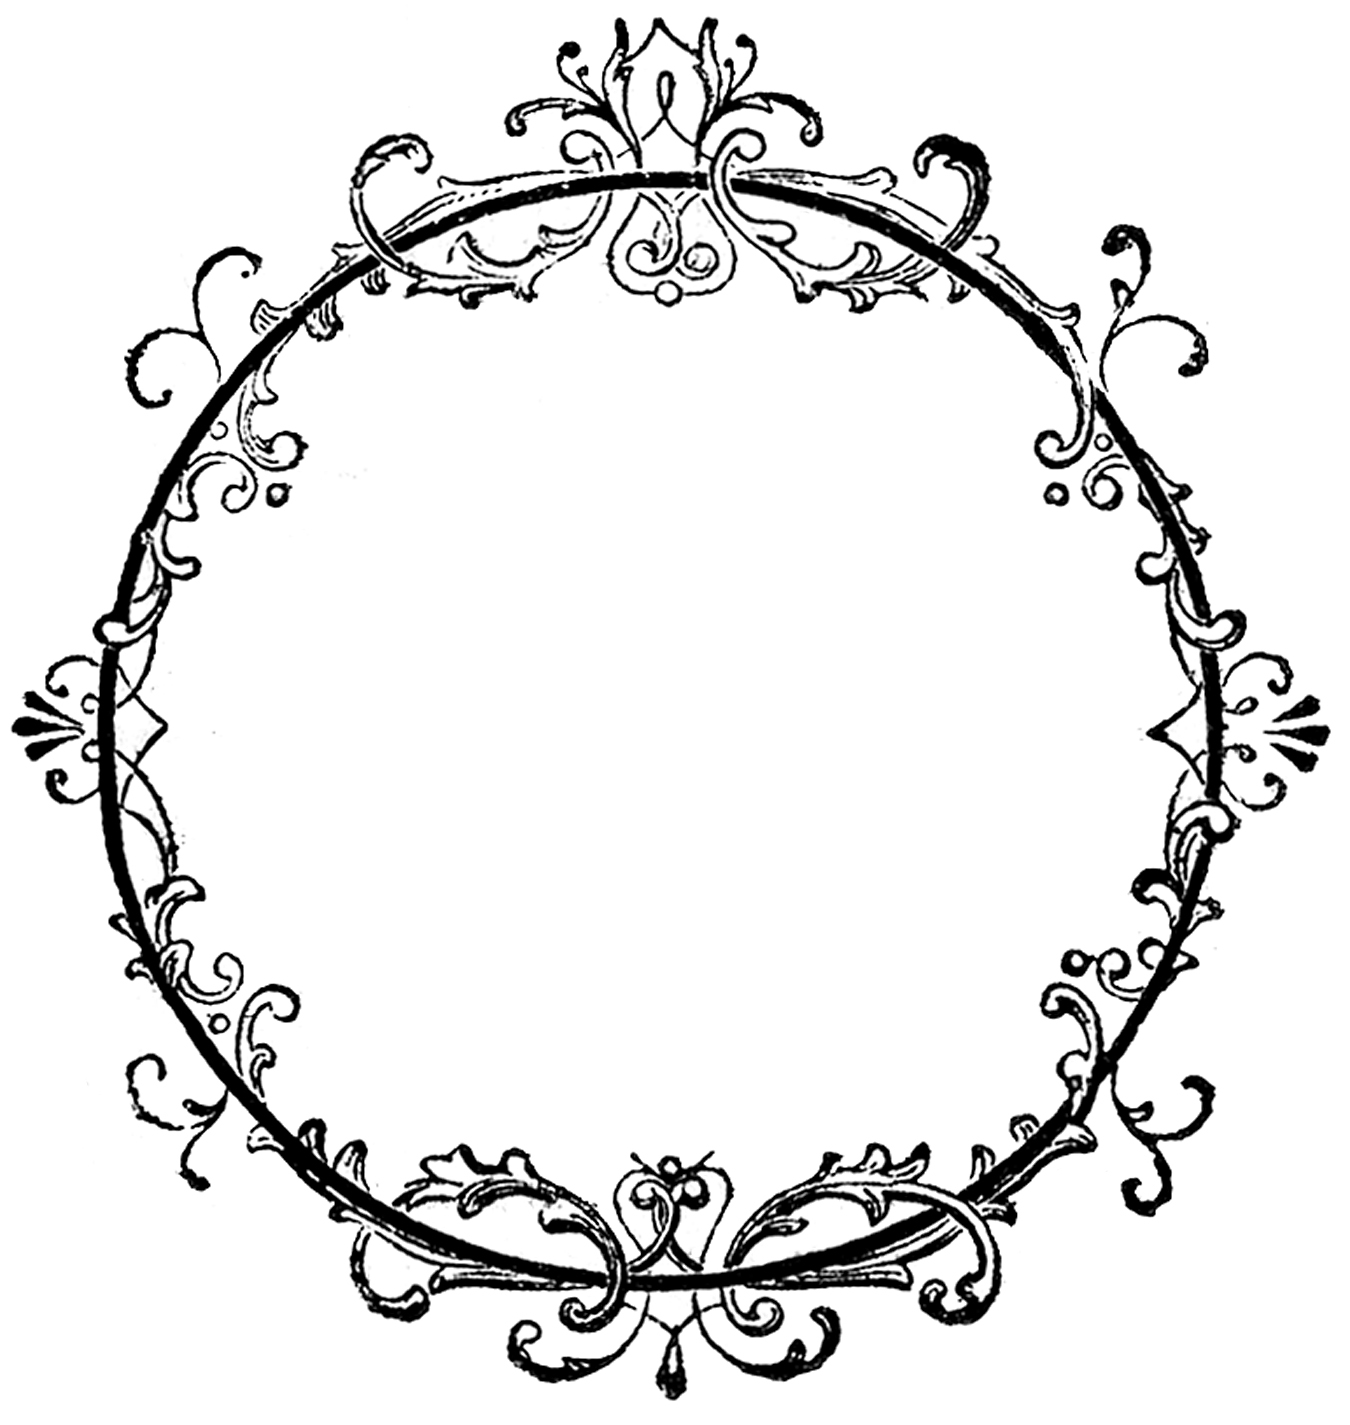 Fancy oval frame clip art free clipart images